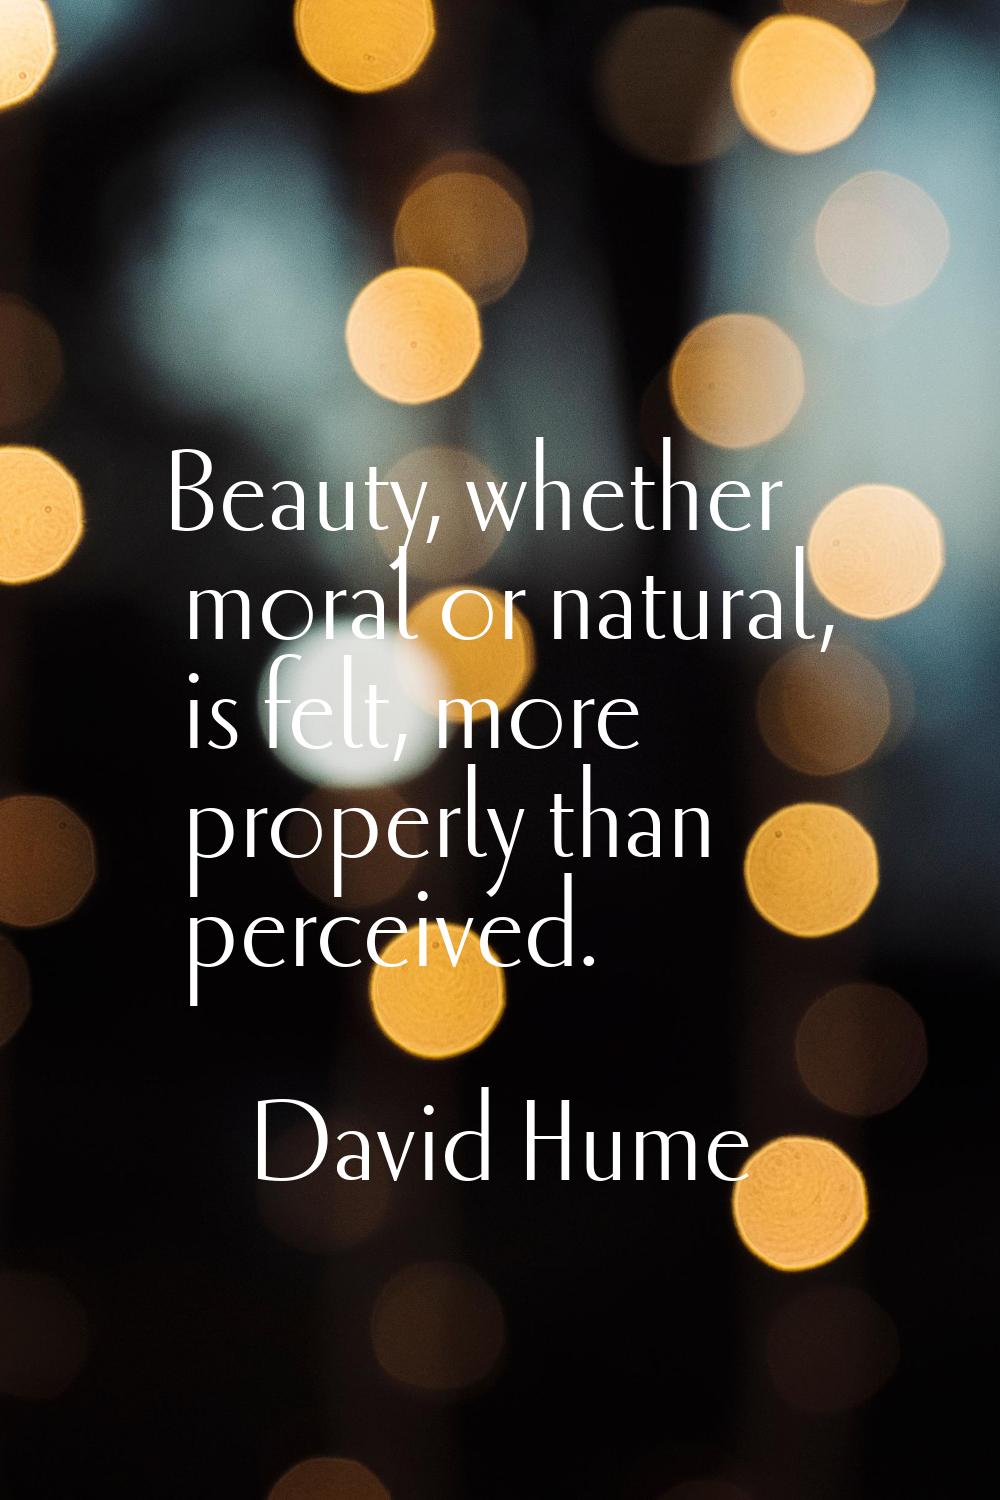 Beauty, whether moral or natural, is felt, more properly than perceived.